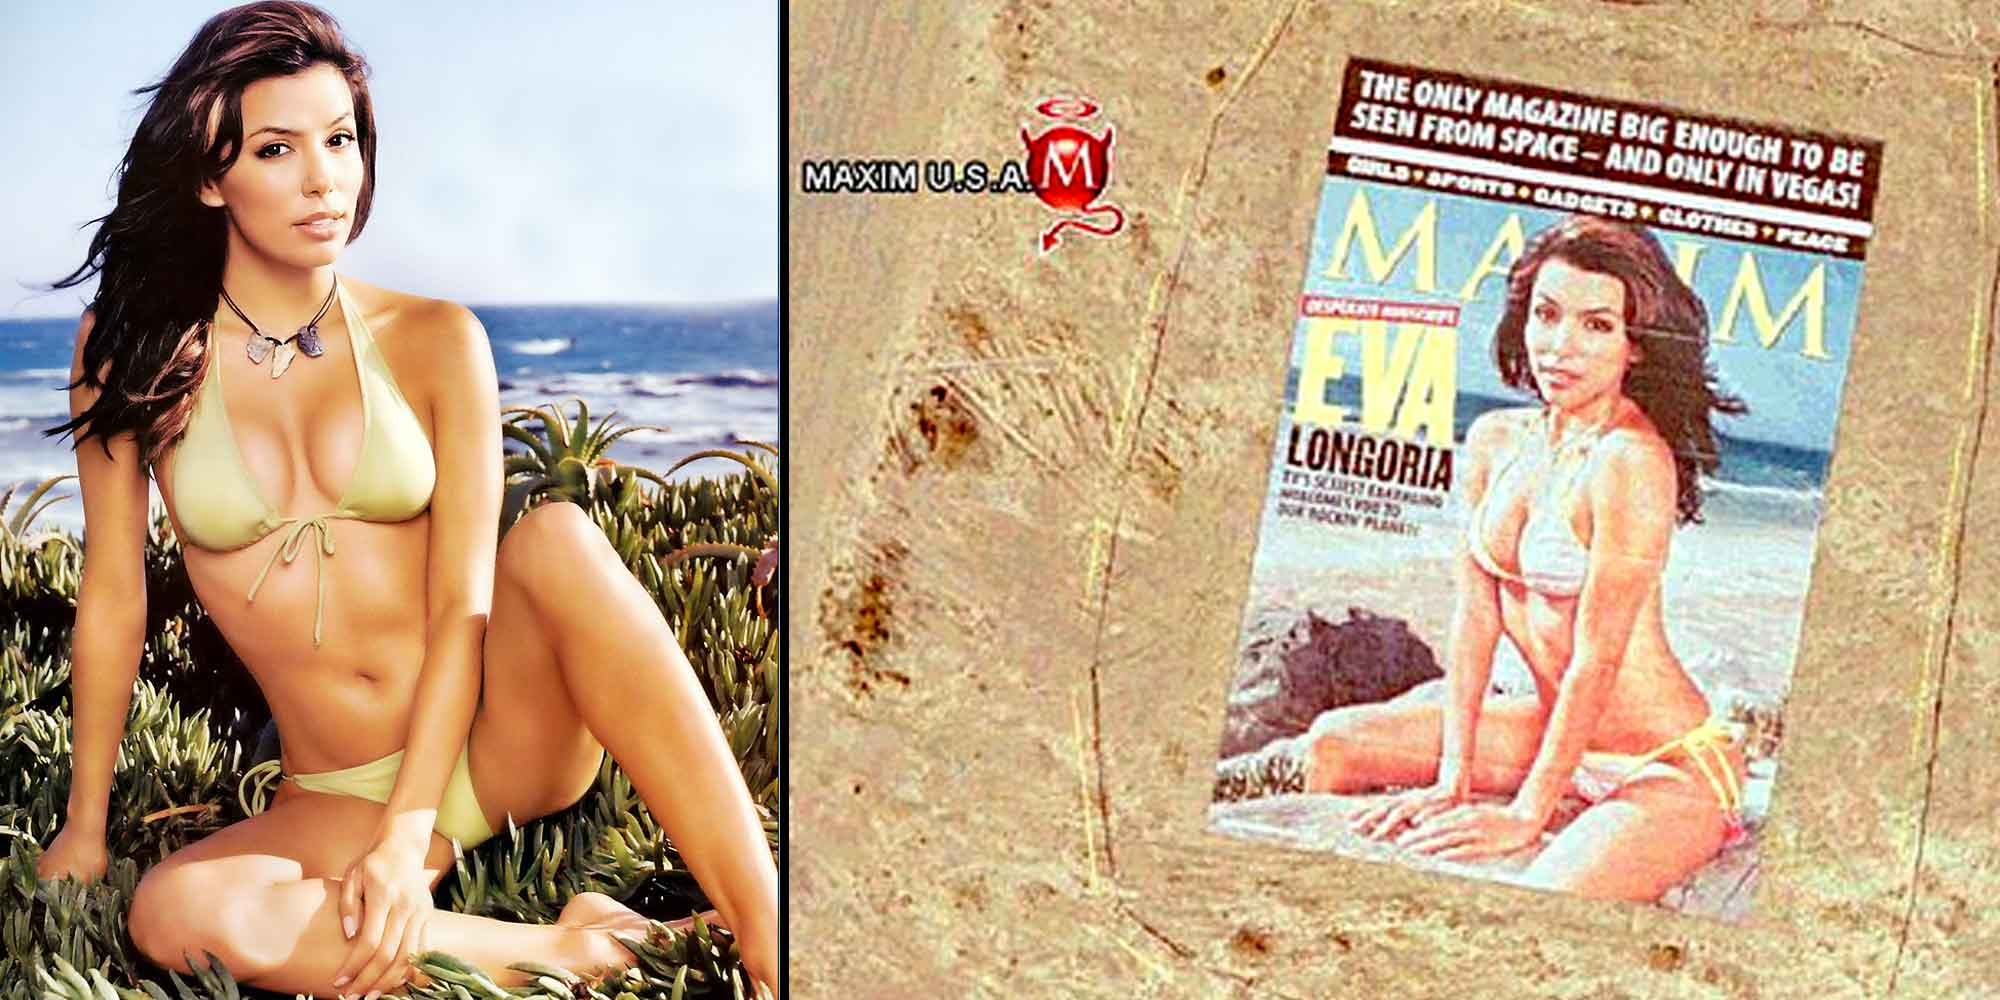 This Sexy Eva Longoria Maxim Cover Can Be Seen From Space (2006)